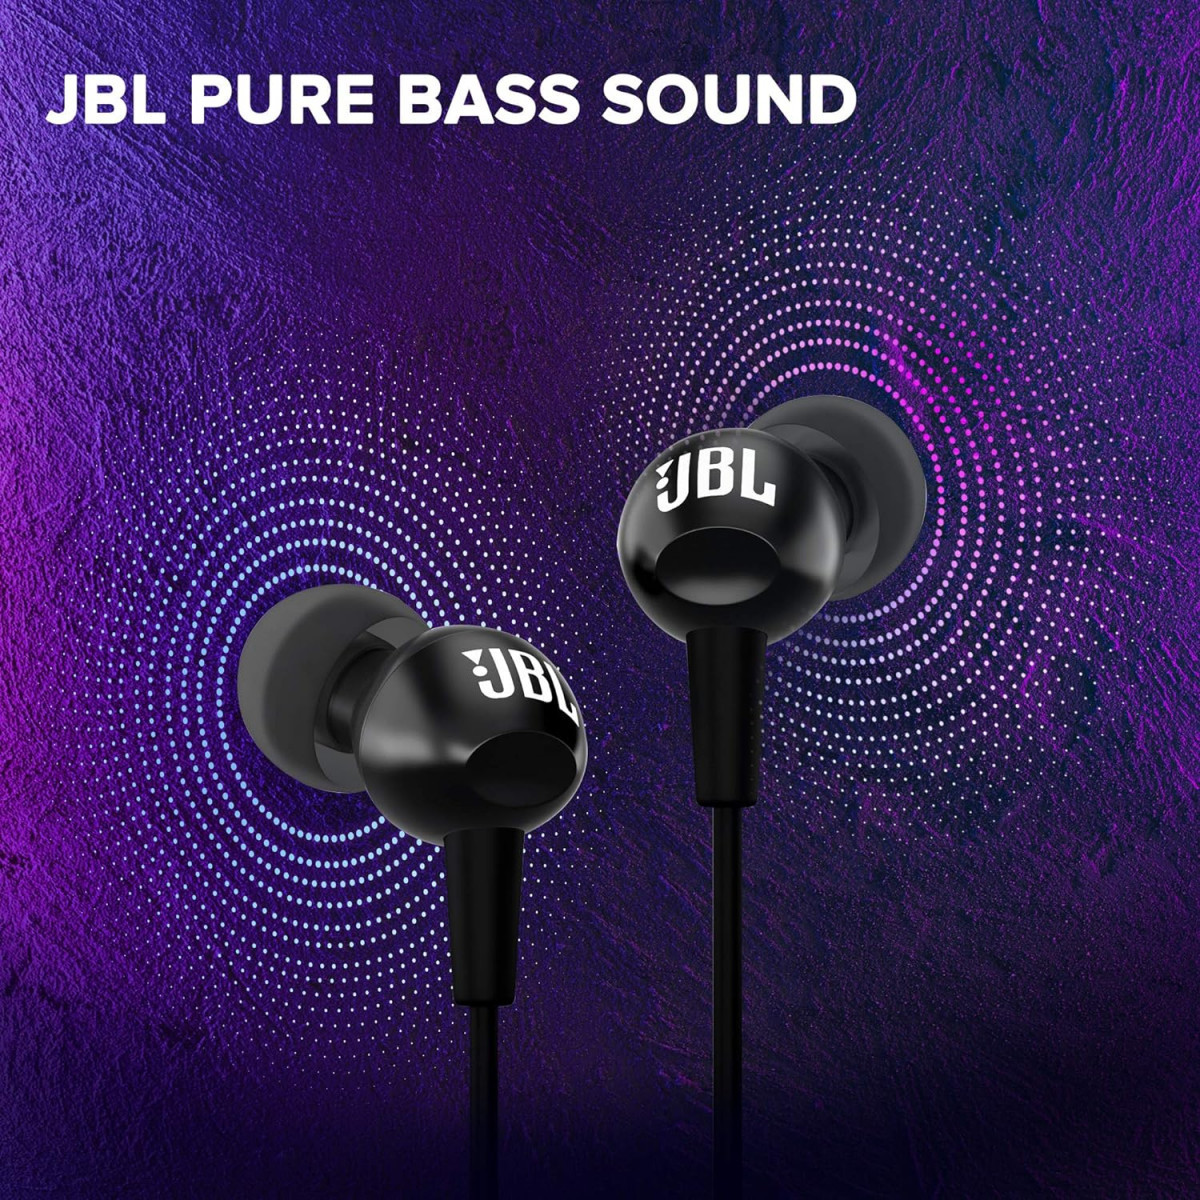 JBL C100SI Wired In Ear Headphones with Mic JBL Pure Bass Sound One Button Multi-function Remote Premium Metallic Finish Angled Buds for Comfort fit Black